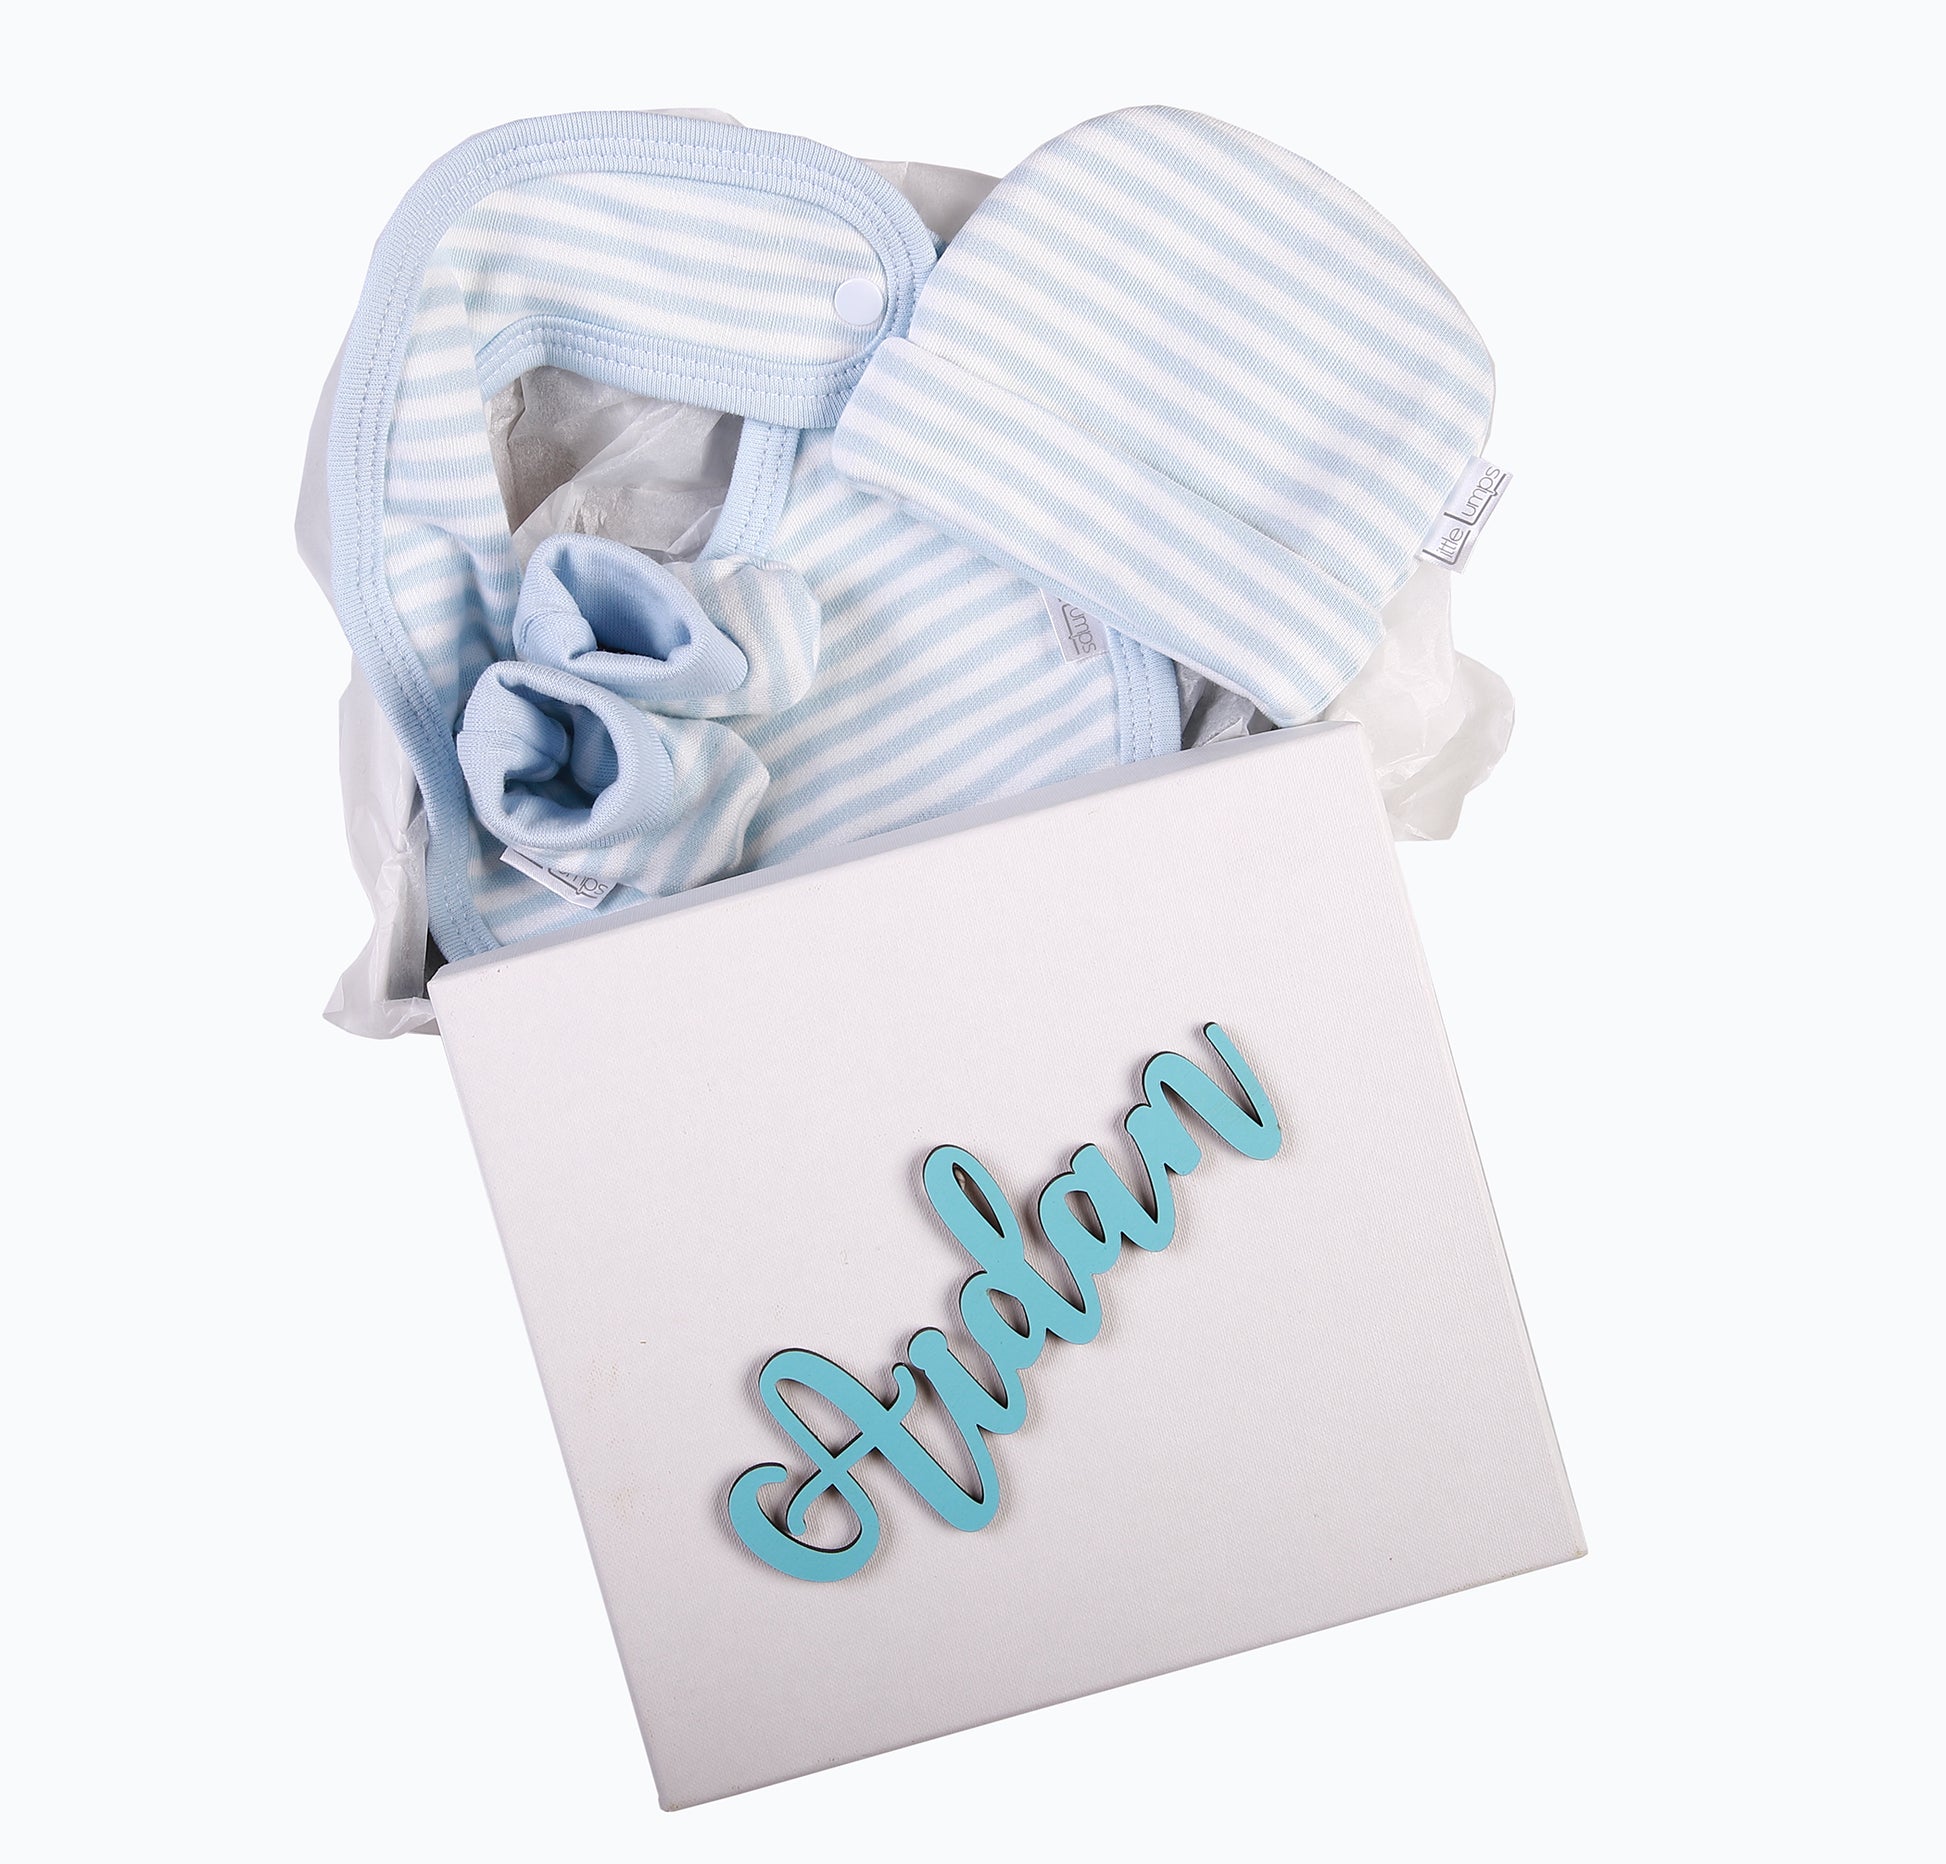 Baby Gift Set 2 - Personalised Box with hat,bib and booties - Little Lumps